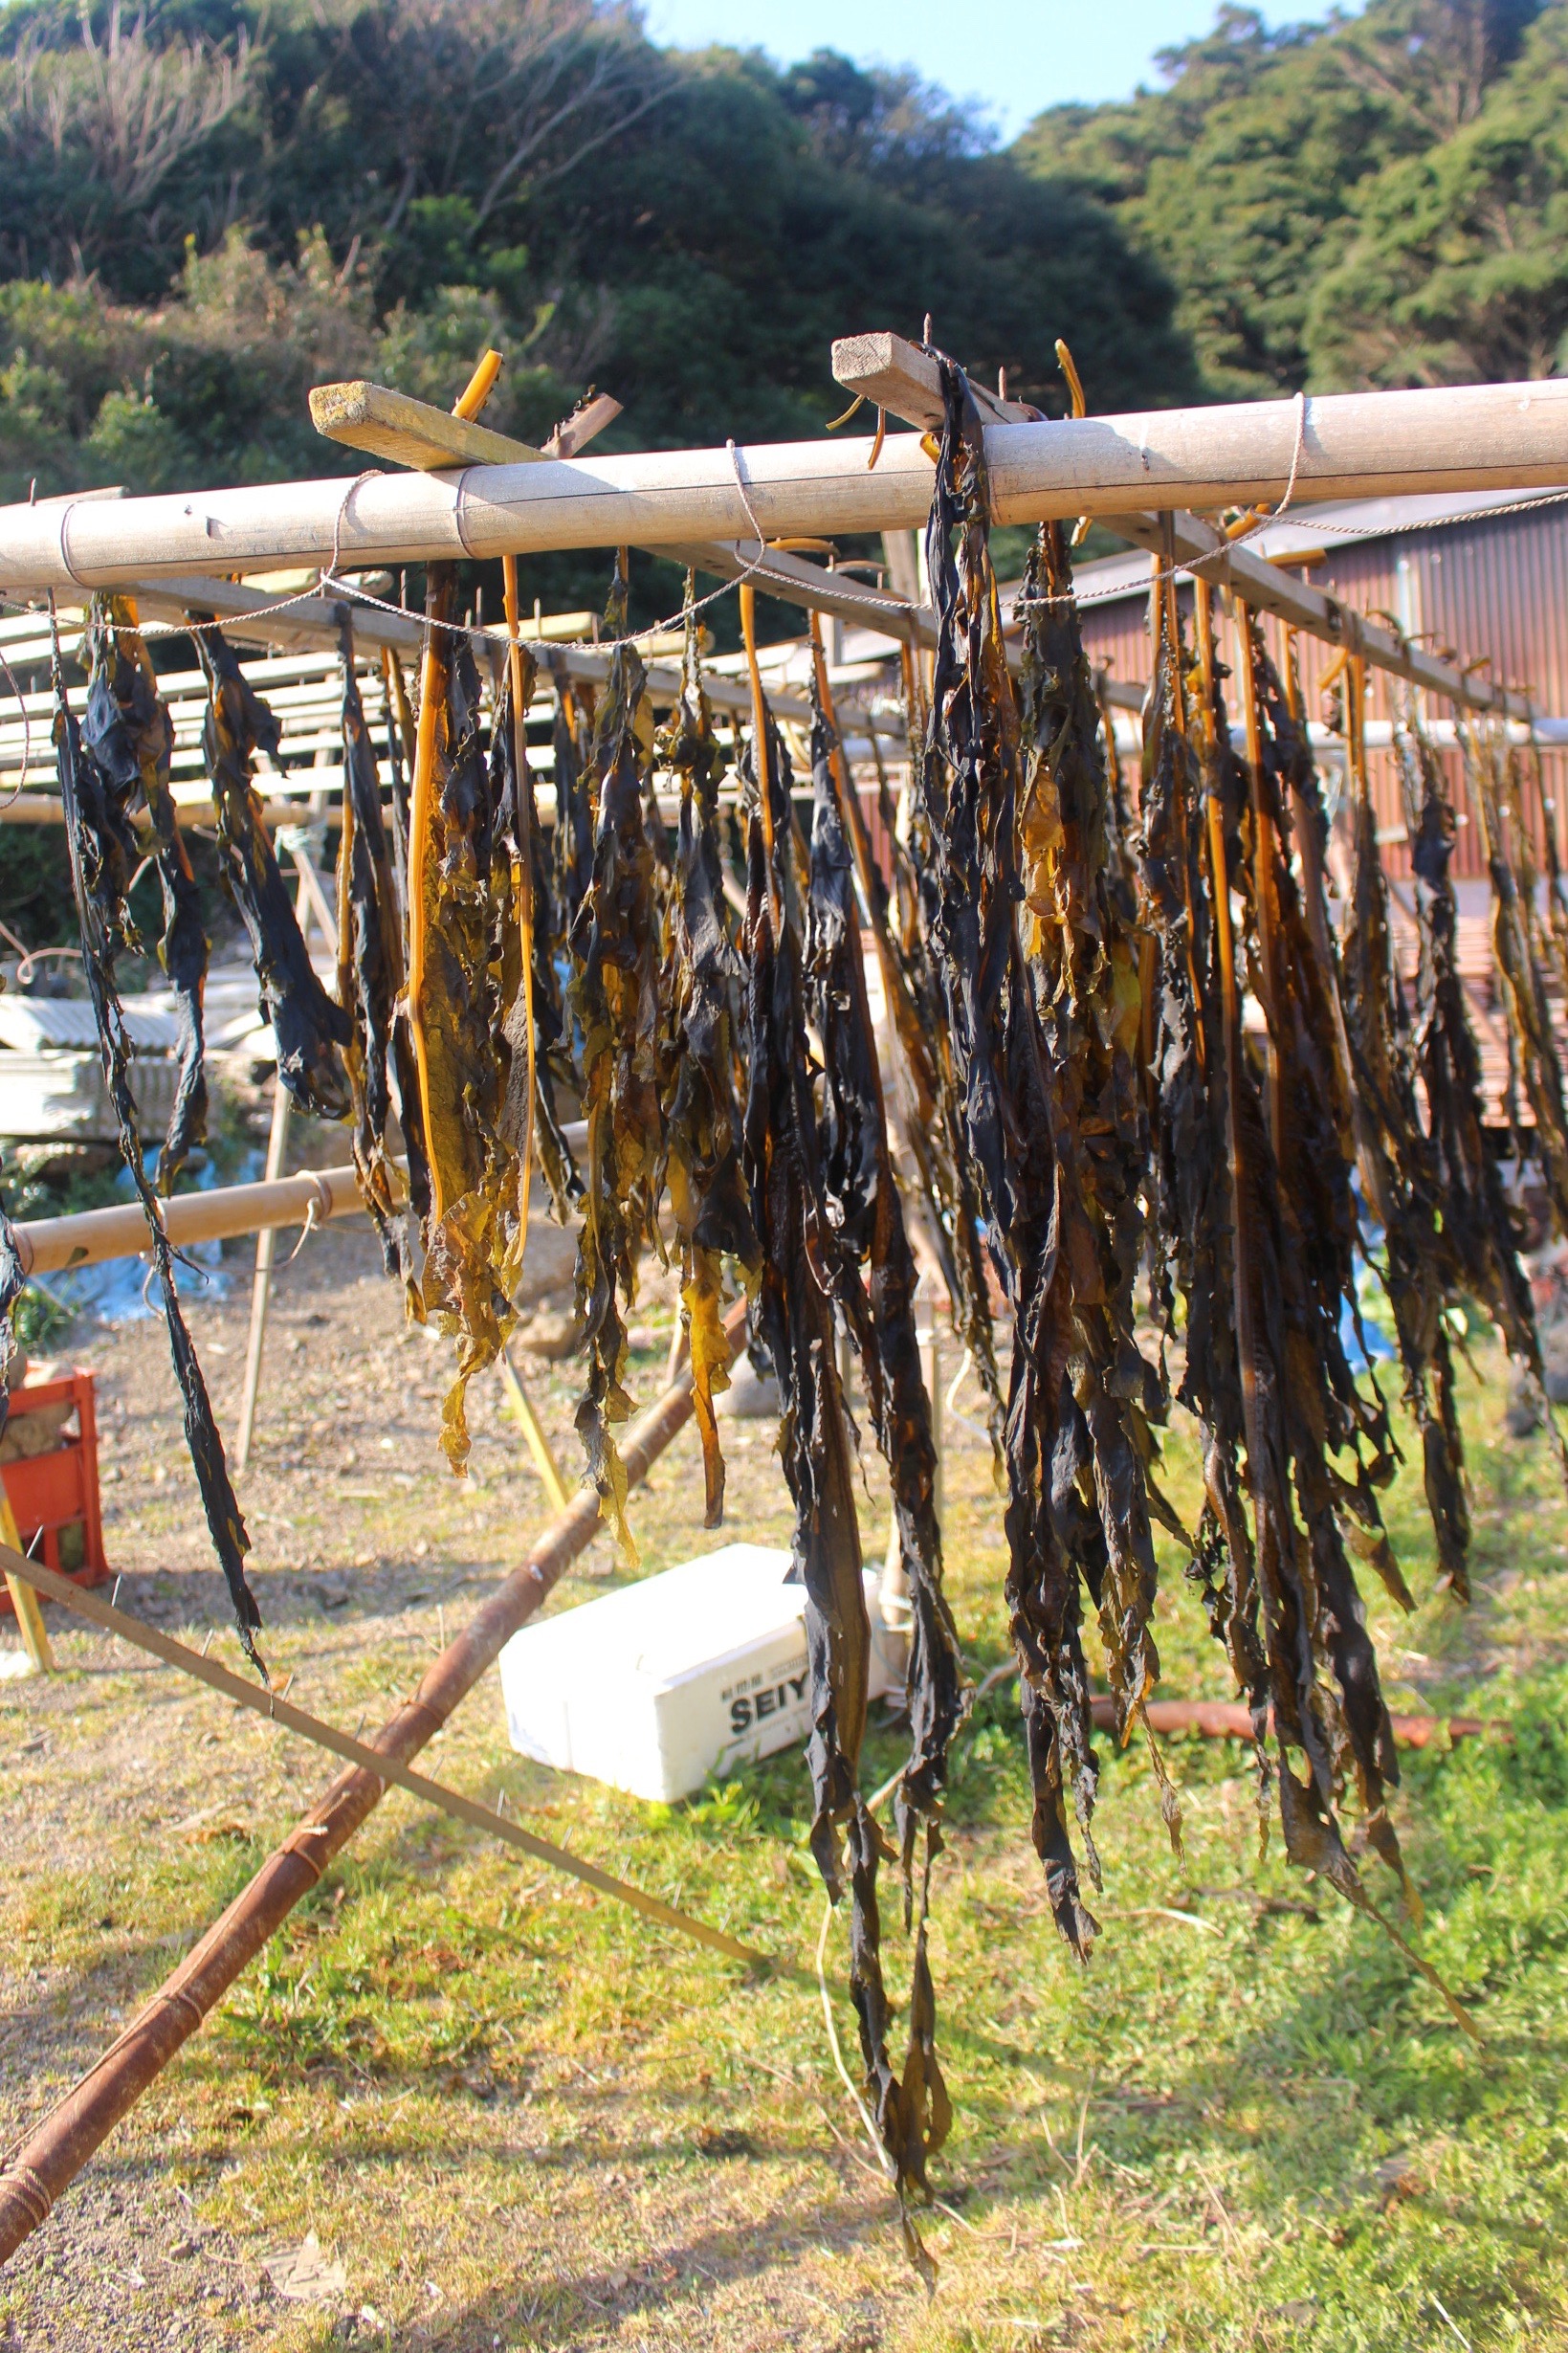 Seaweed caught by ama divers, hung out to dry in the sun © Amy Elize 2017